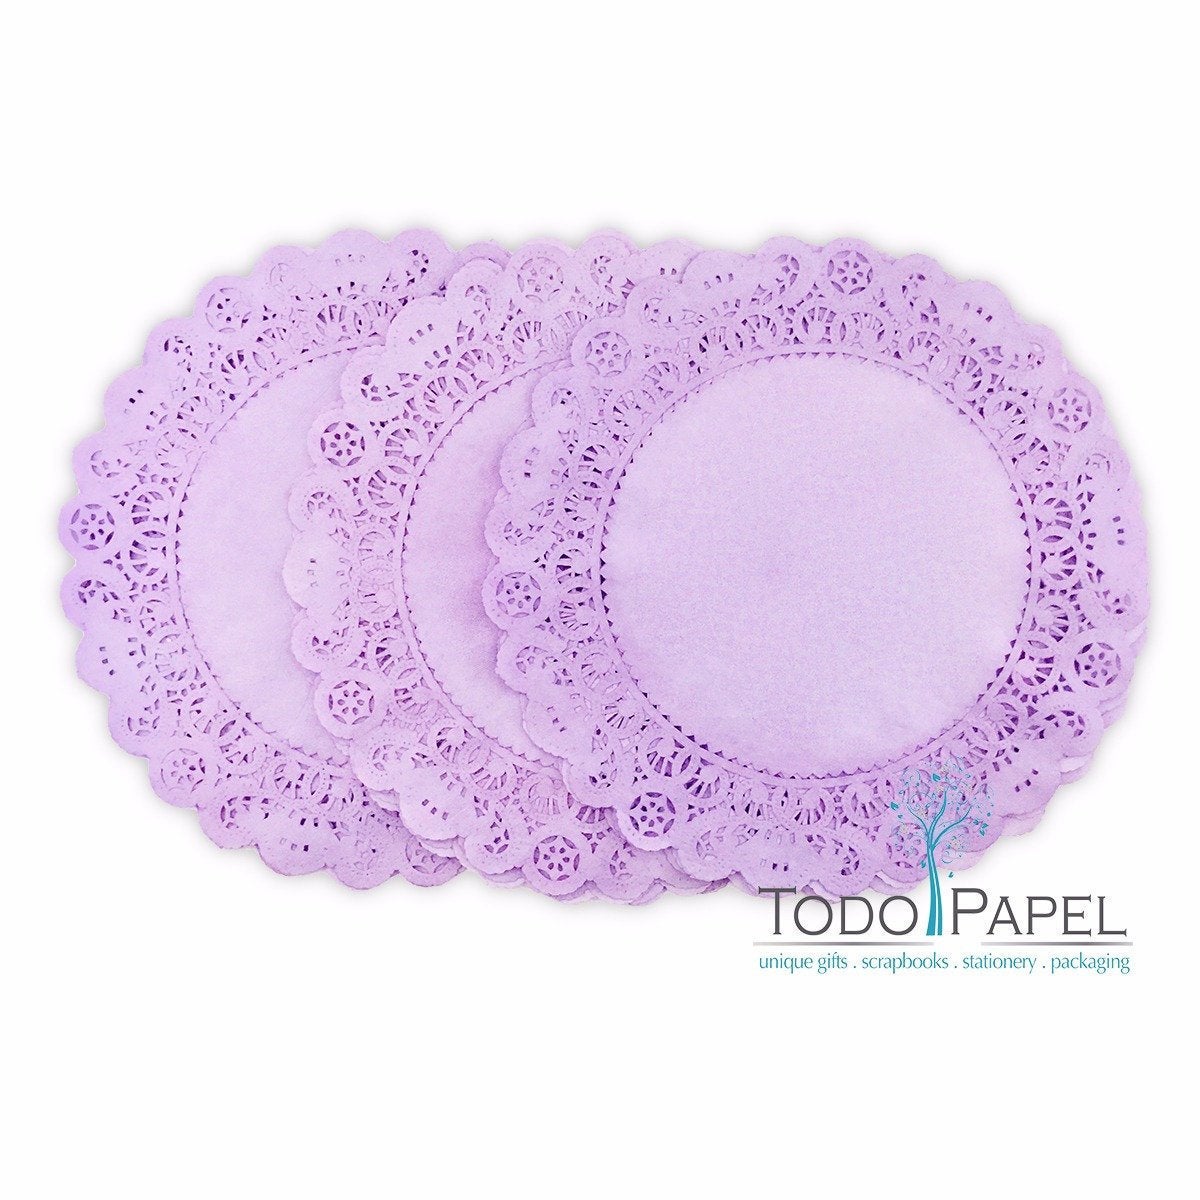 50 Pack Of 12 Inch Normandy Style Lilac Paper Lace Doilies - Great As Table Décor Plate Chargers, Placemats, And Centerpieces For Wedding